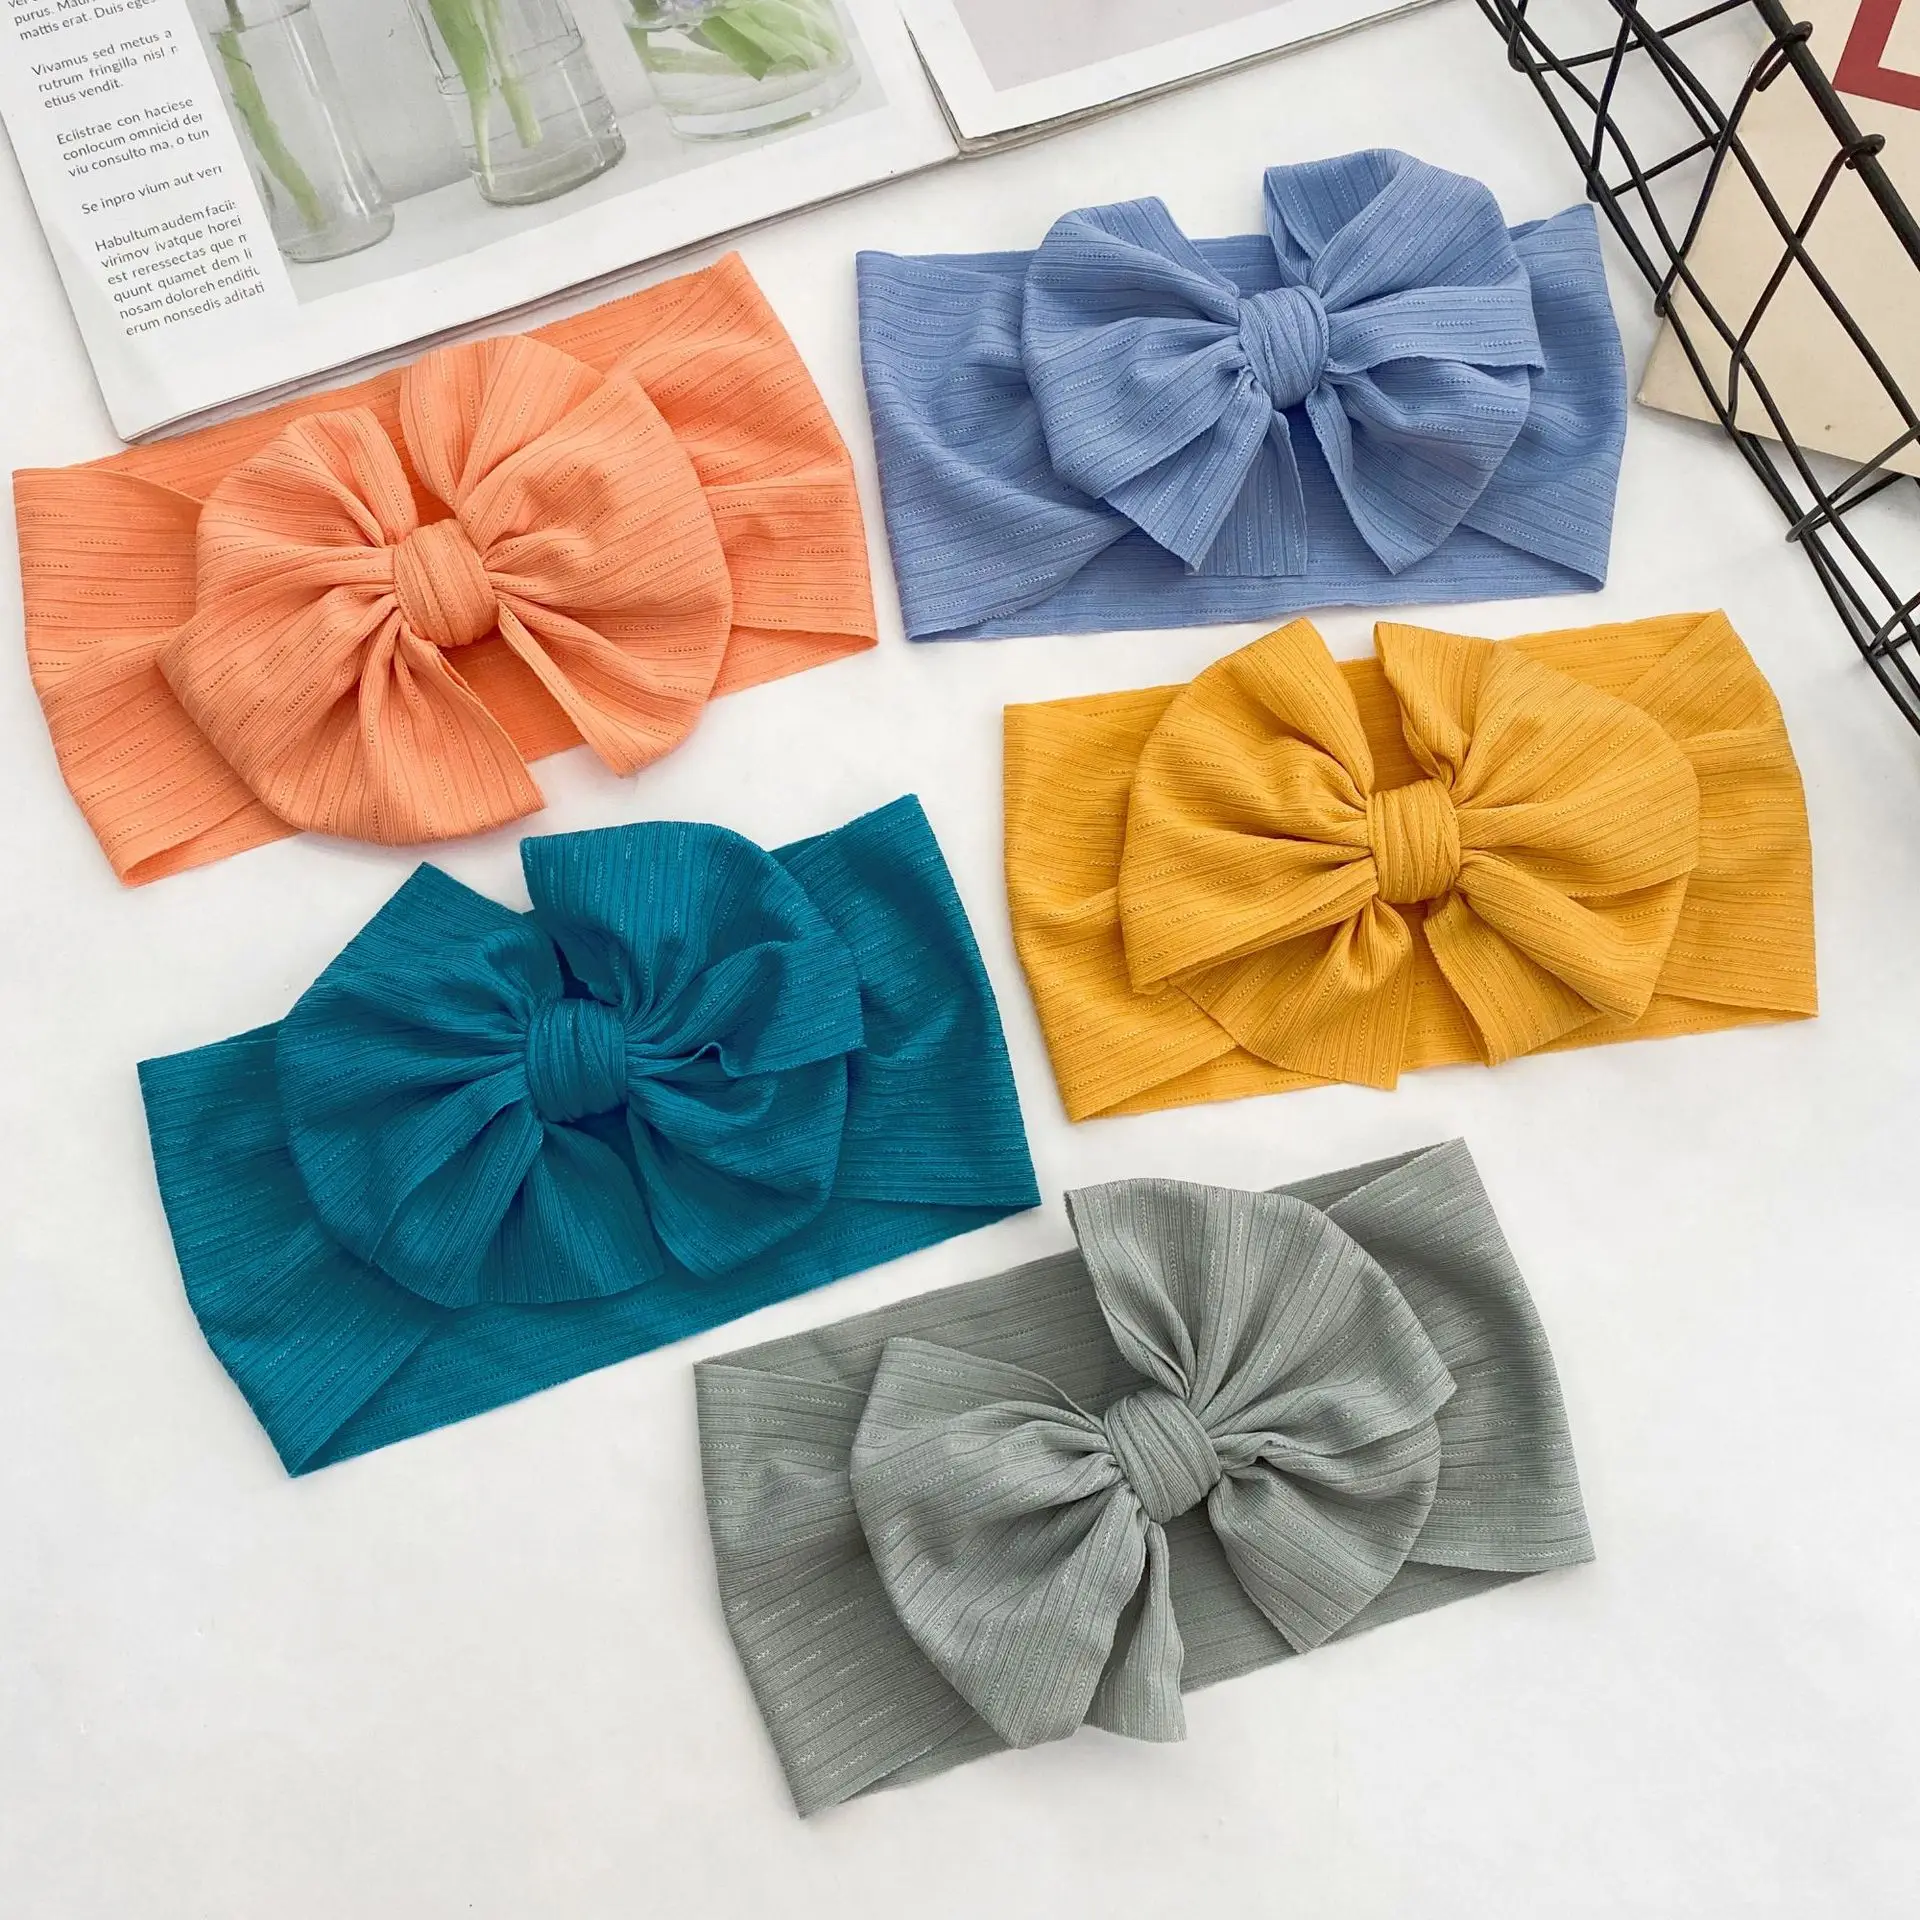 

30pc/lot 2021 New Baby Girls Knotbow Headband,Kids Solid Knotted Hair Bow Turban Headbands Children Girls Party Hair Accessories